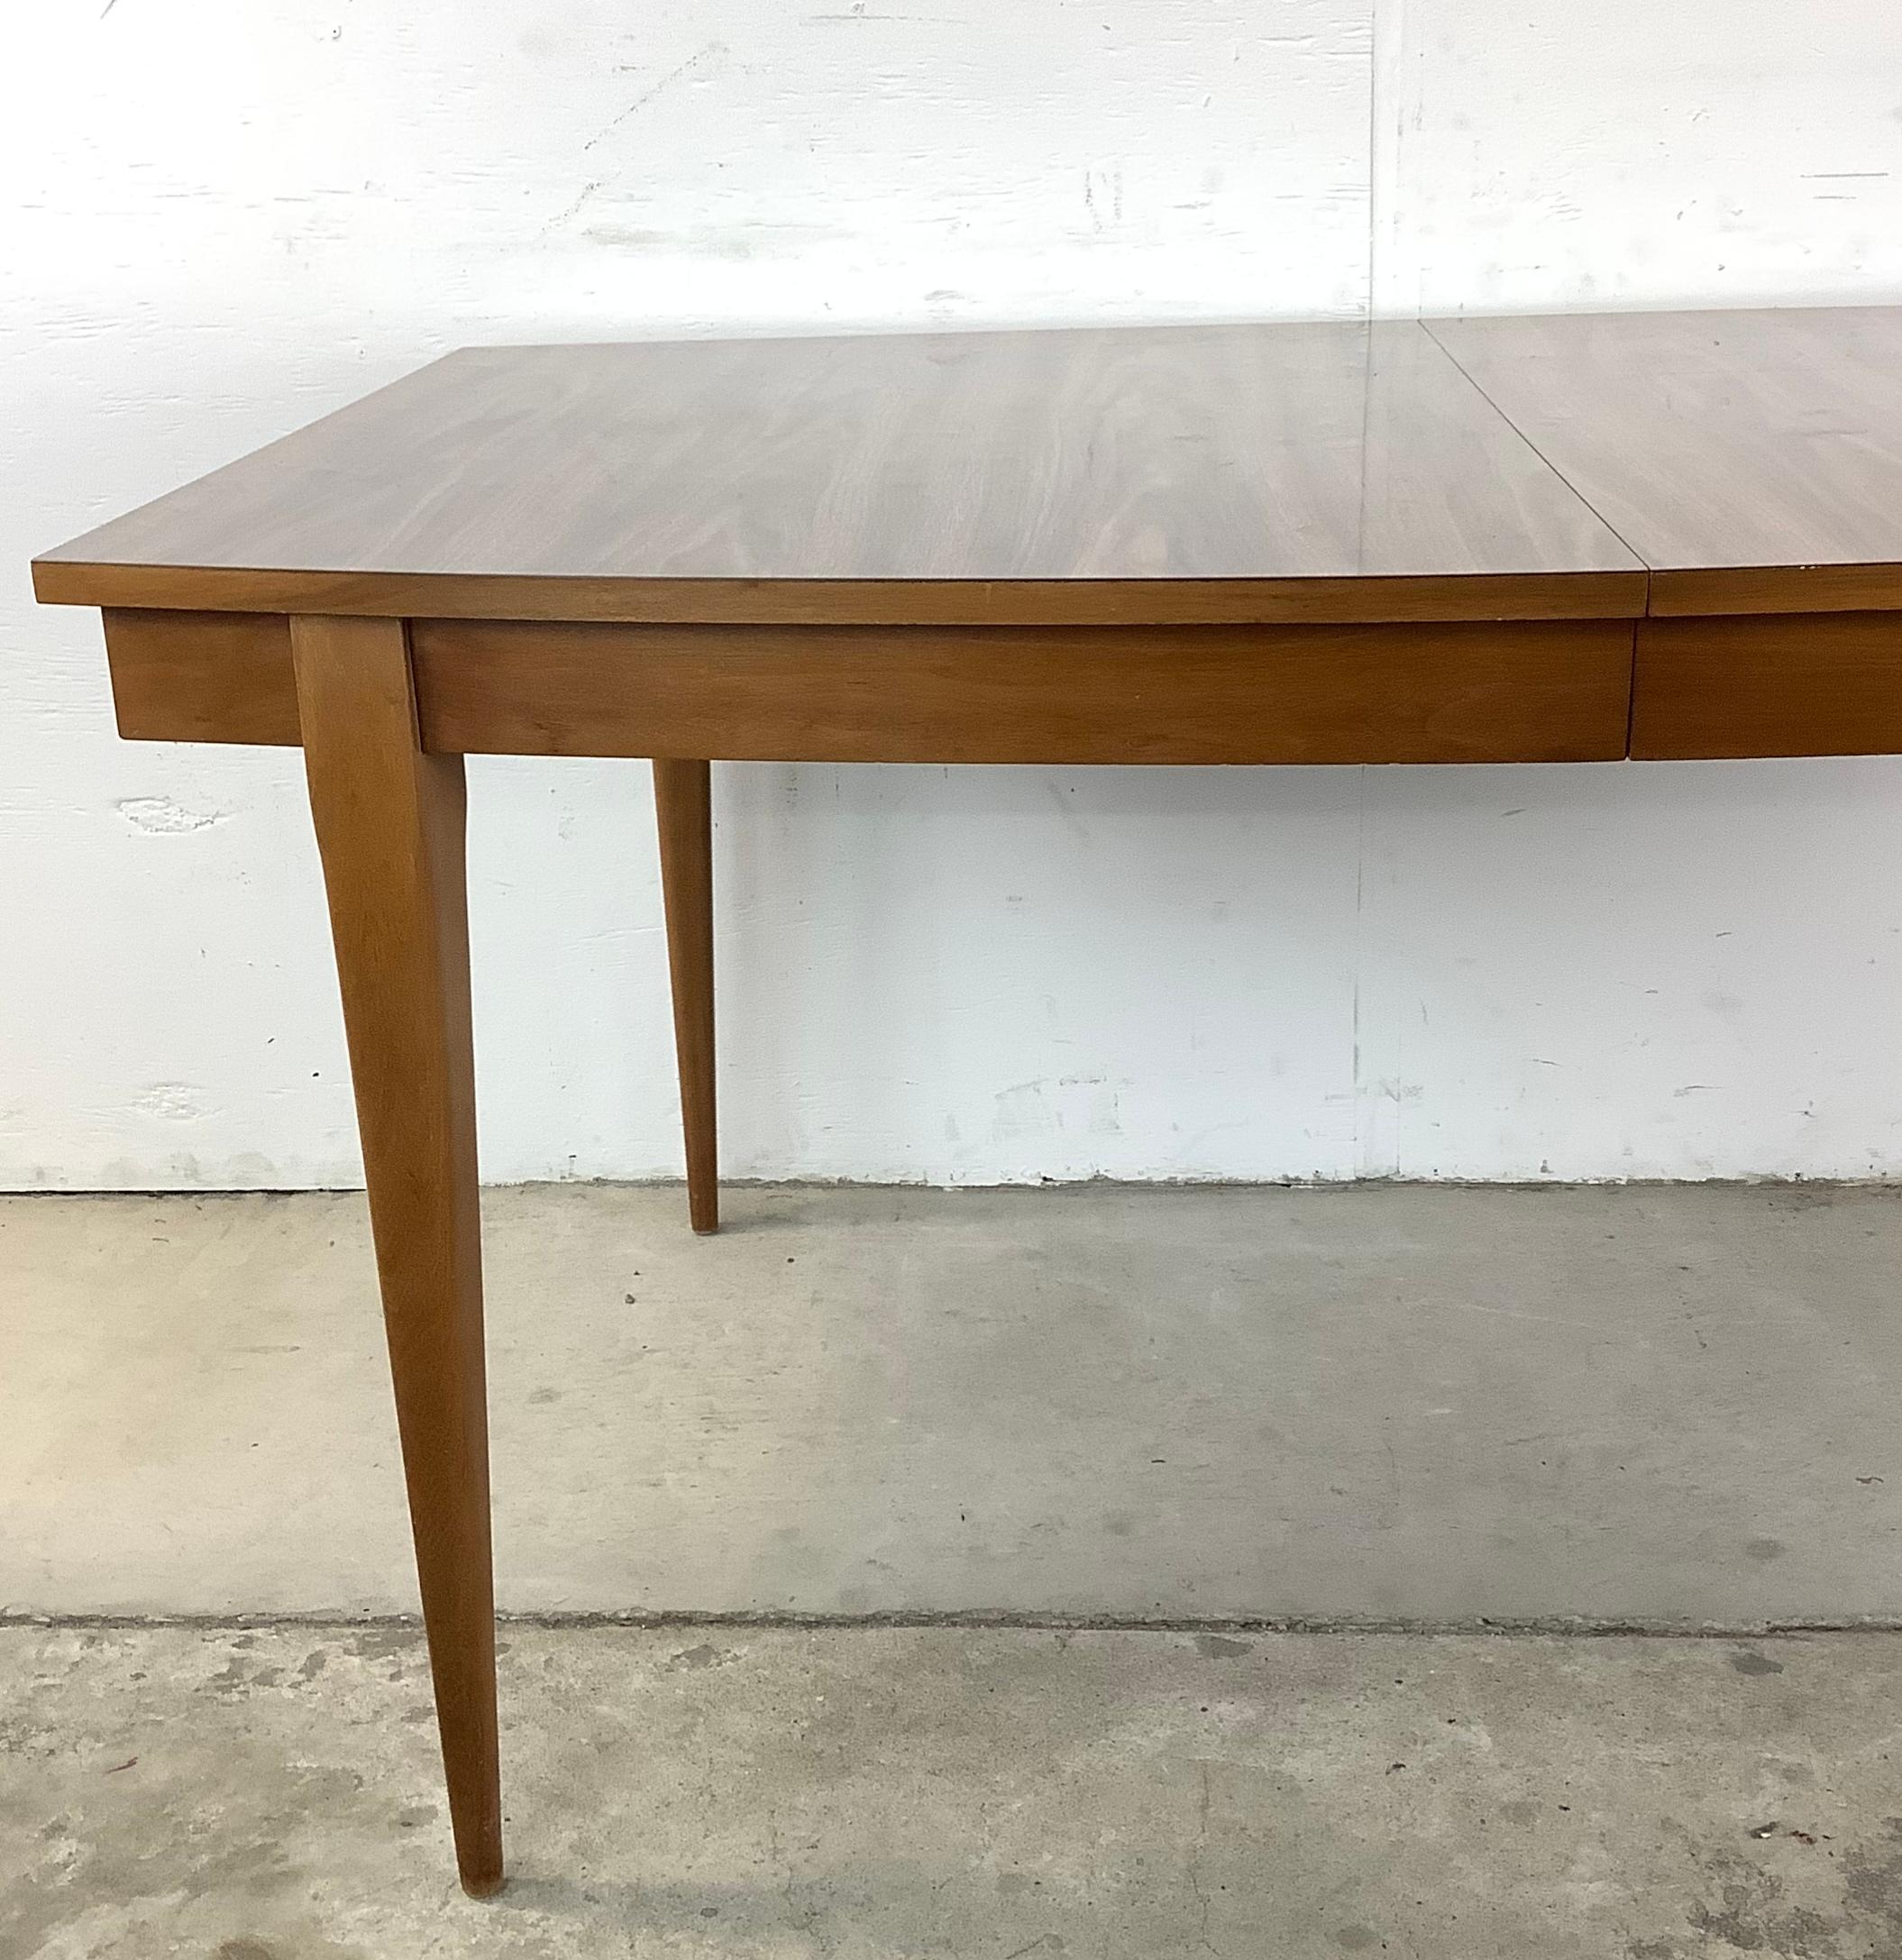 This Mid-Century Dining Table with Removable Table Leaf makes the perfect centerpiece for entertaining in style. This is your chance to add a bit of the sleek mid-century modern style that defined 20th century American design- this dining table is